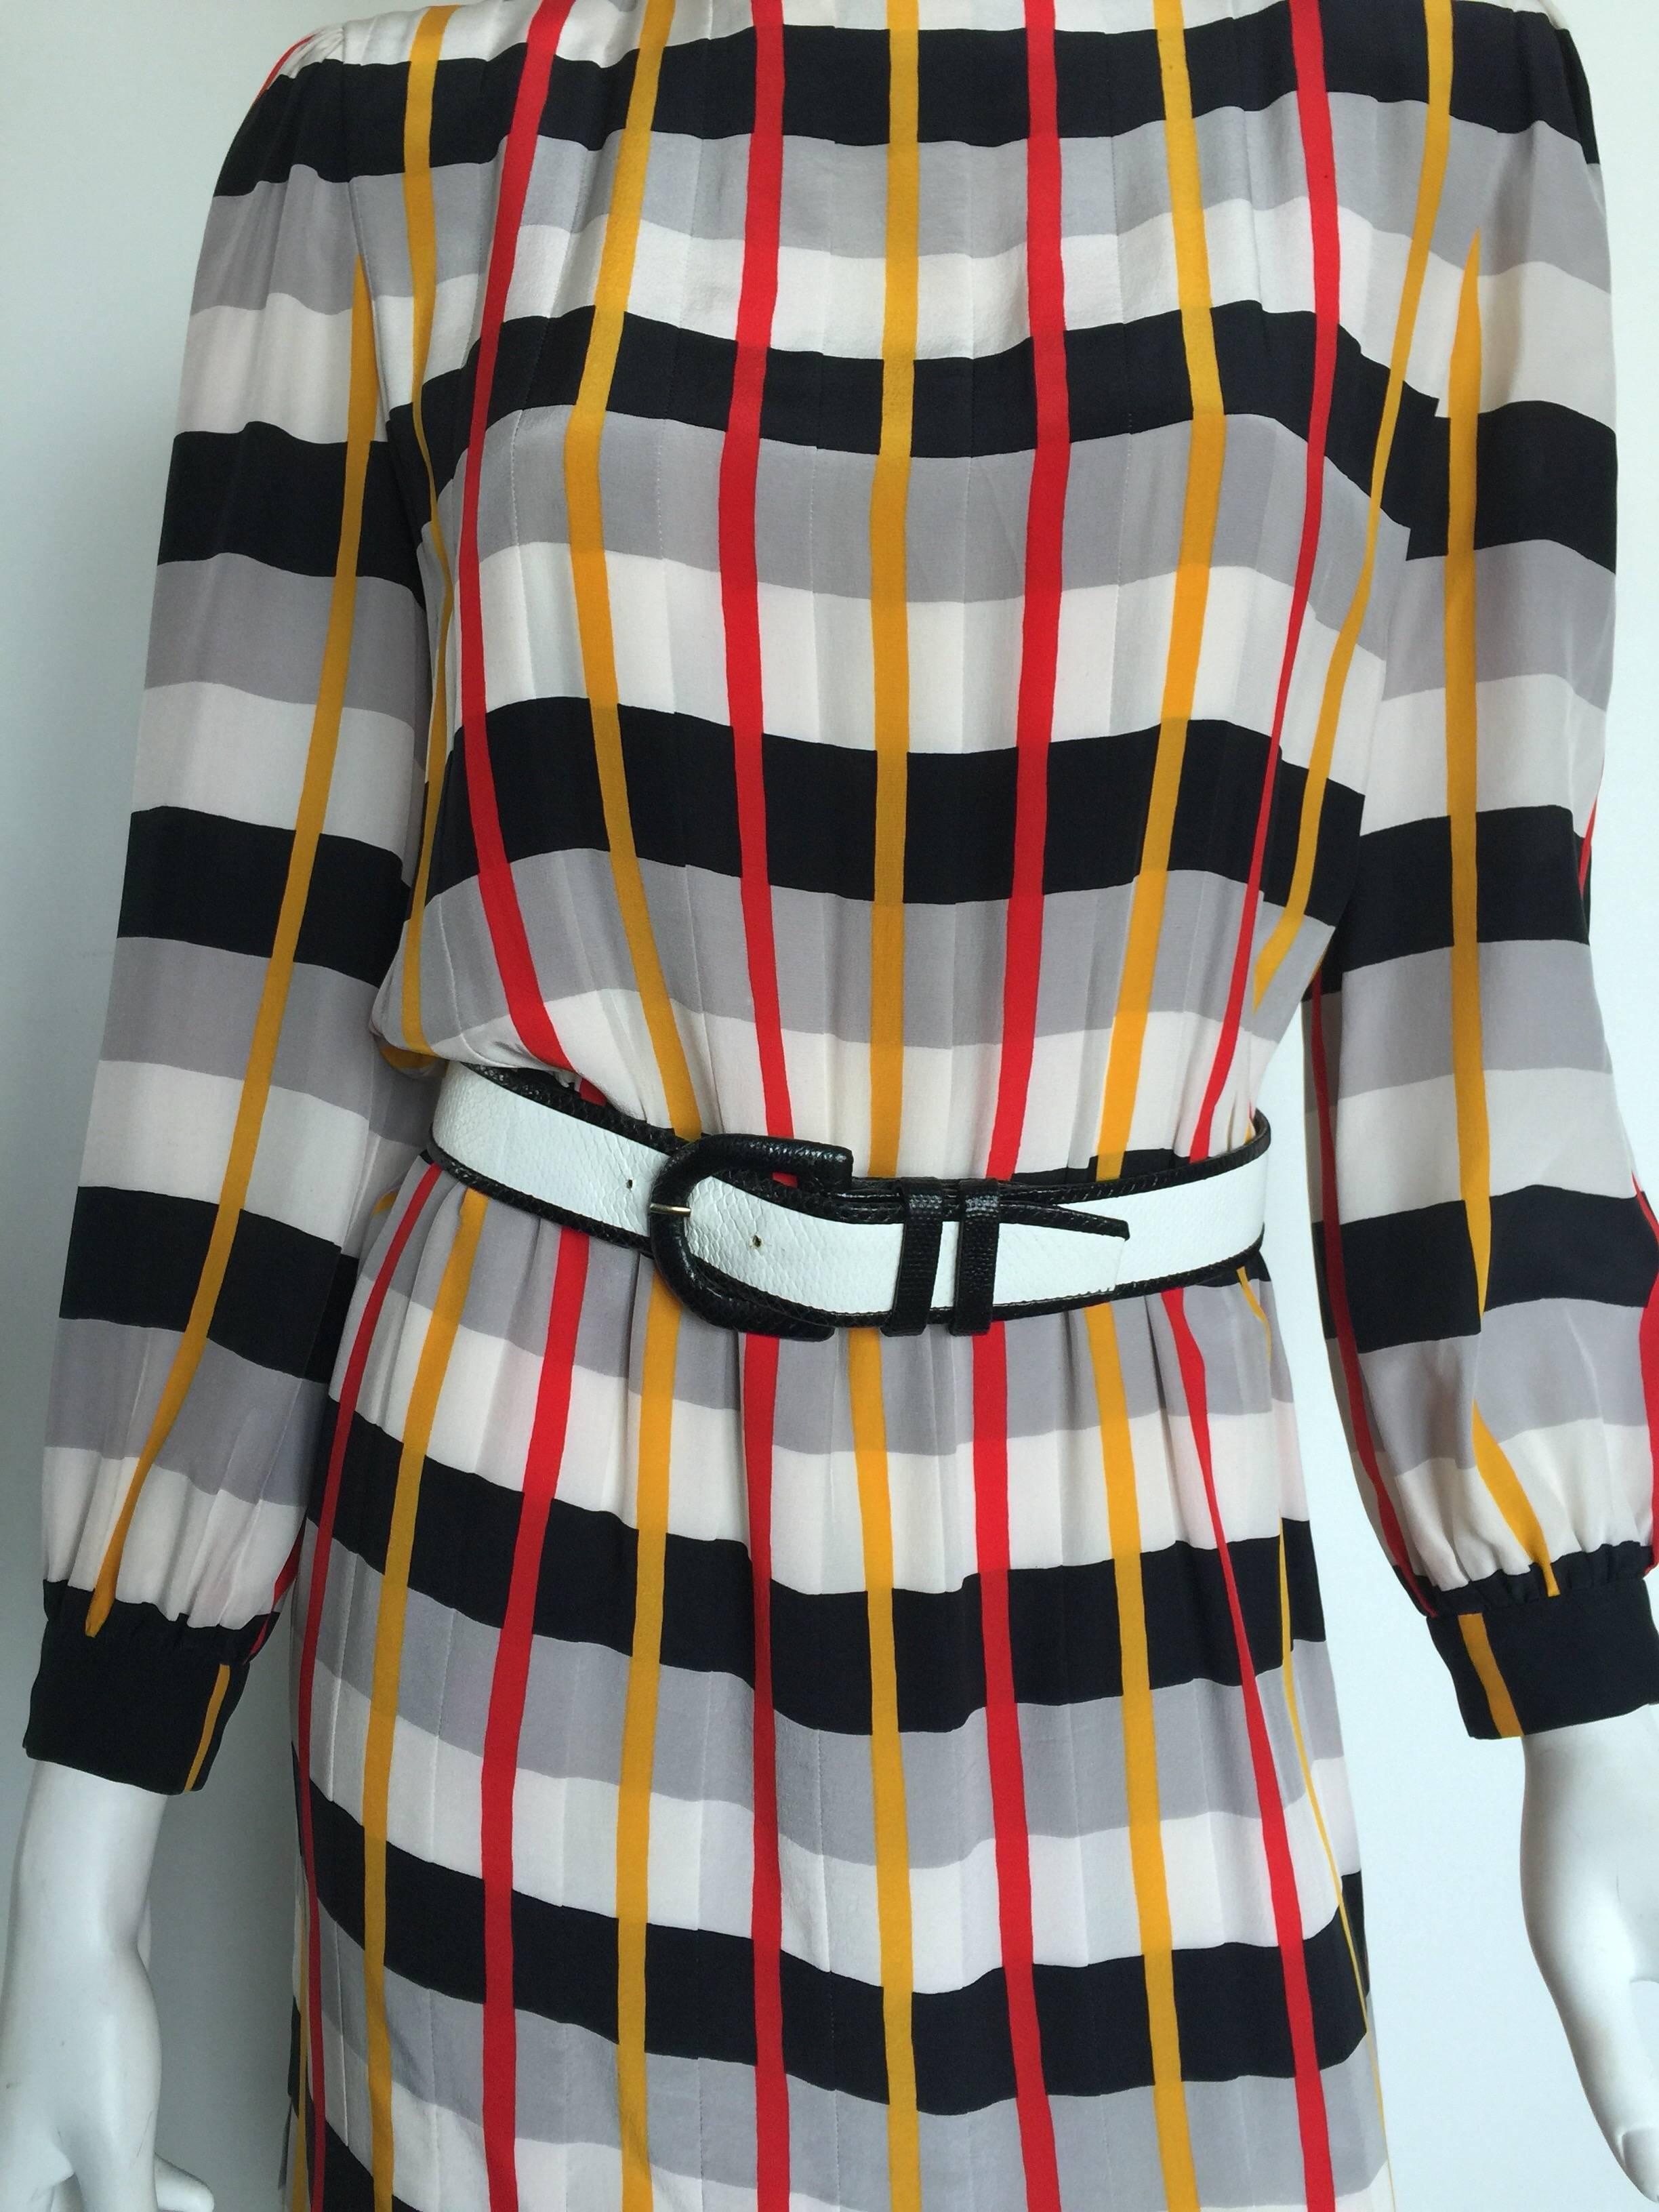 This Bill Blass plaid dress is from 1970s. This long sleeved dress has grey and black horizontal stripes along with red and yellow vertical stripes which create a unique plaid print. It is reminiscent of Marc Jacobs Spring/Summer 2013 collection.